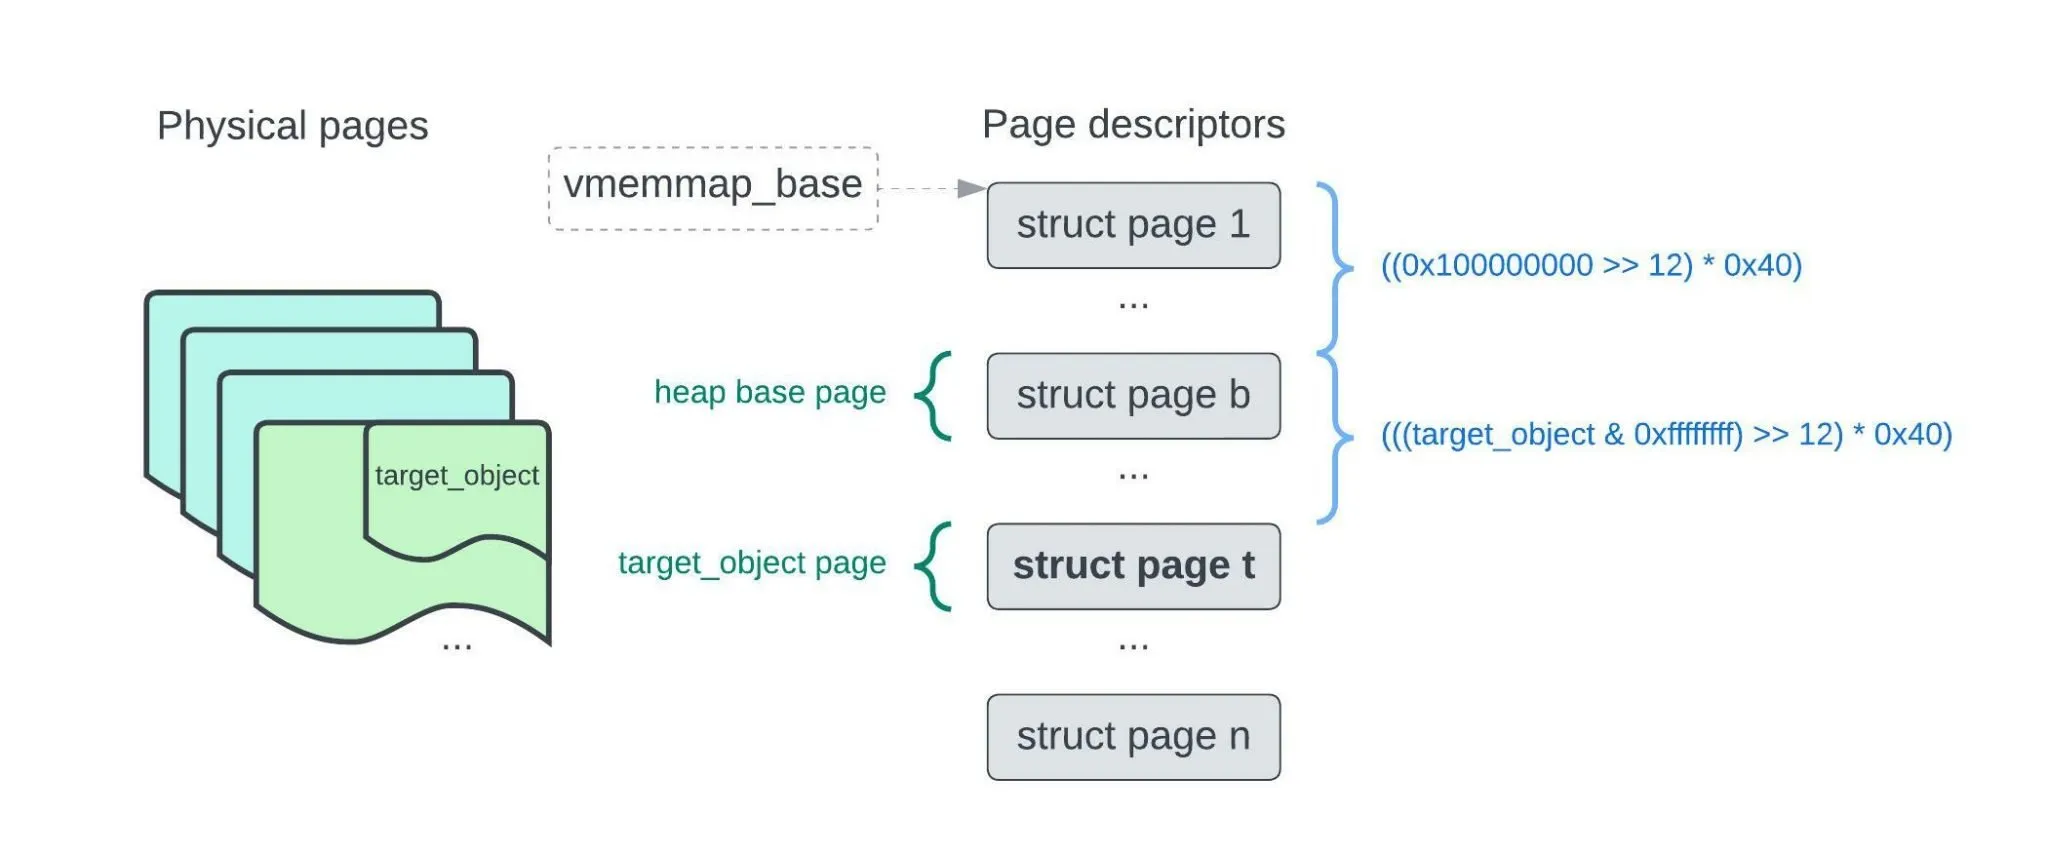 1-indexing the target object's page